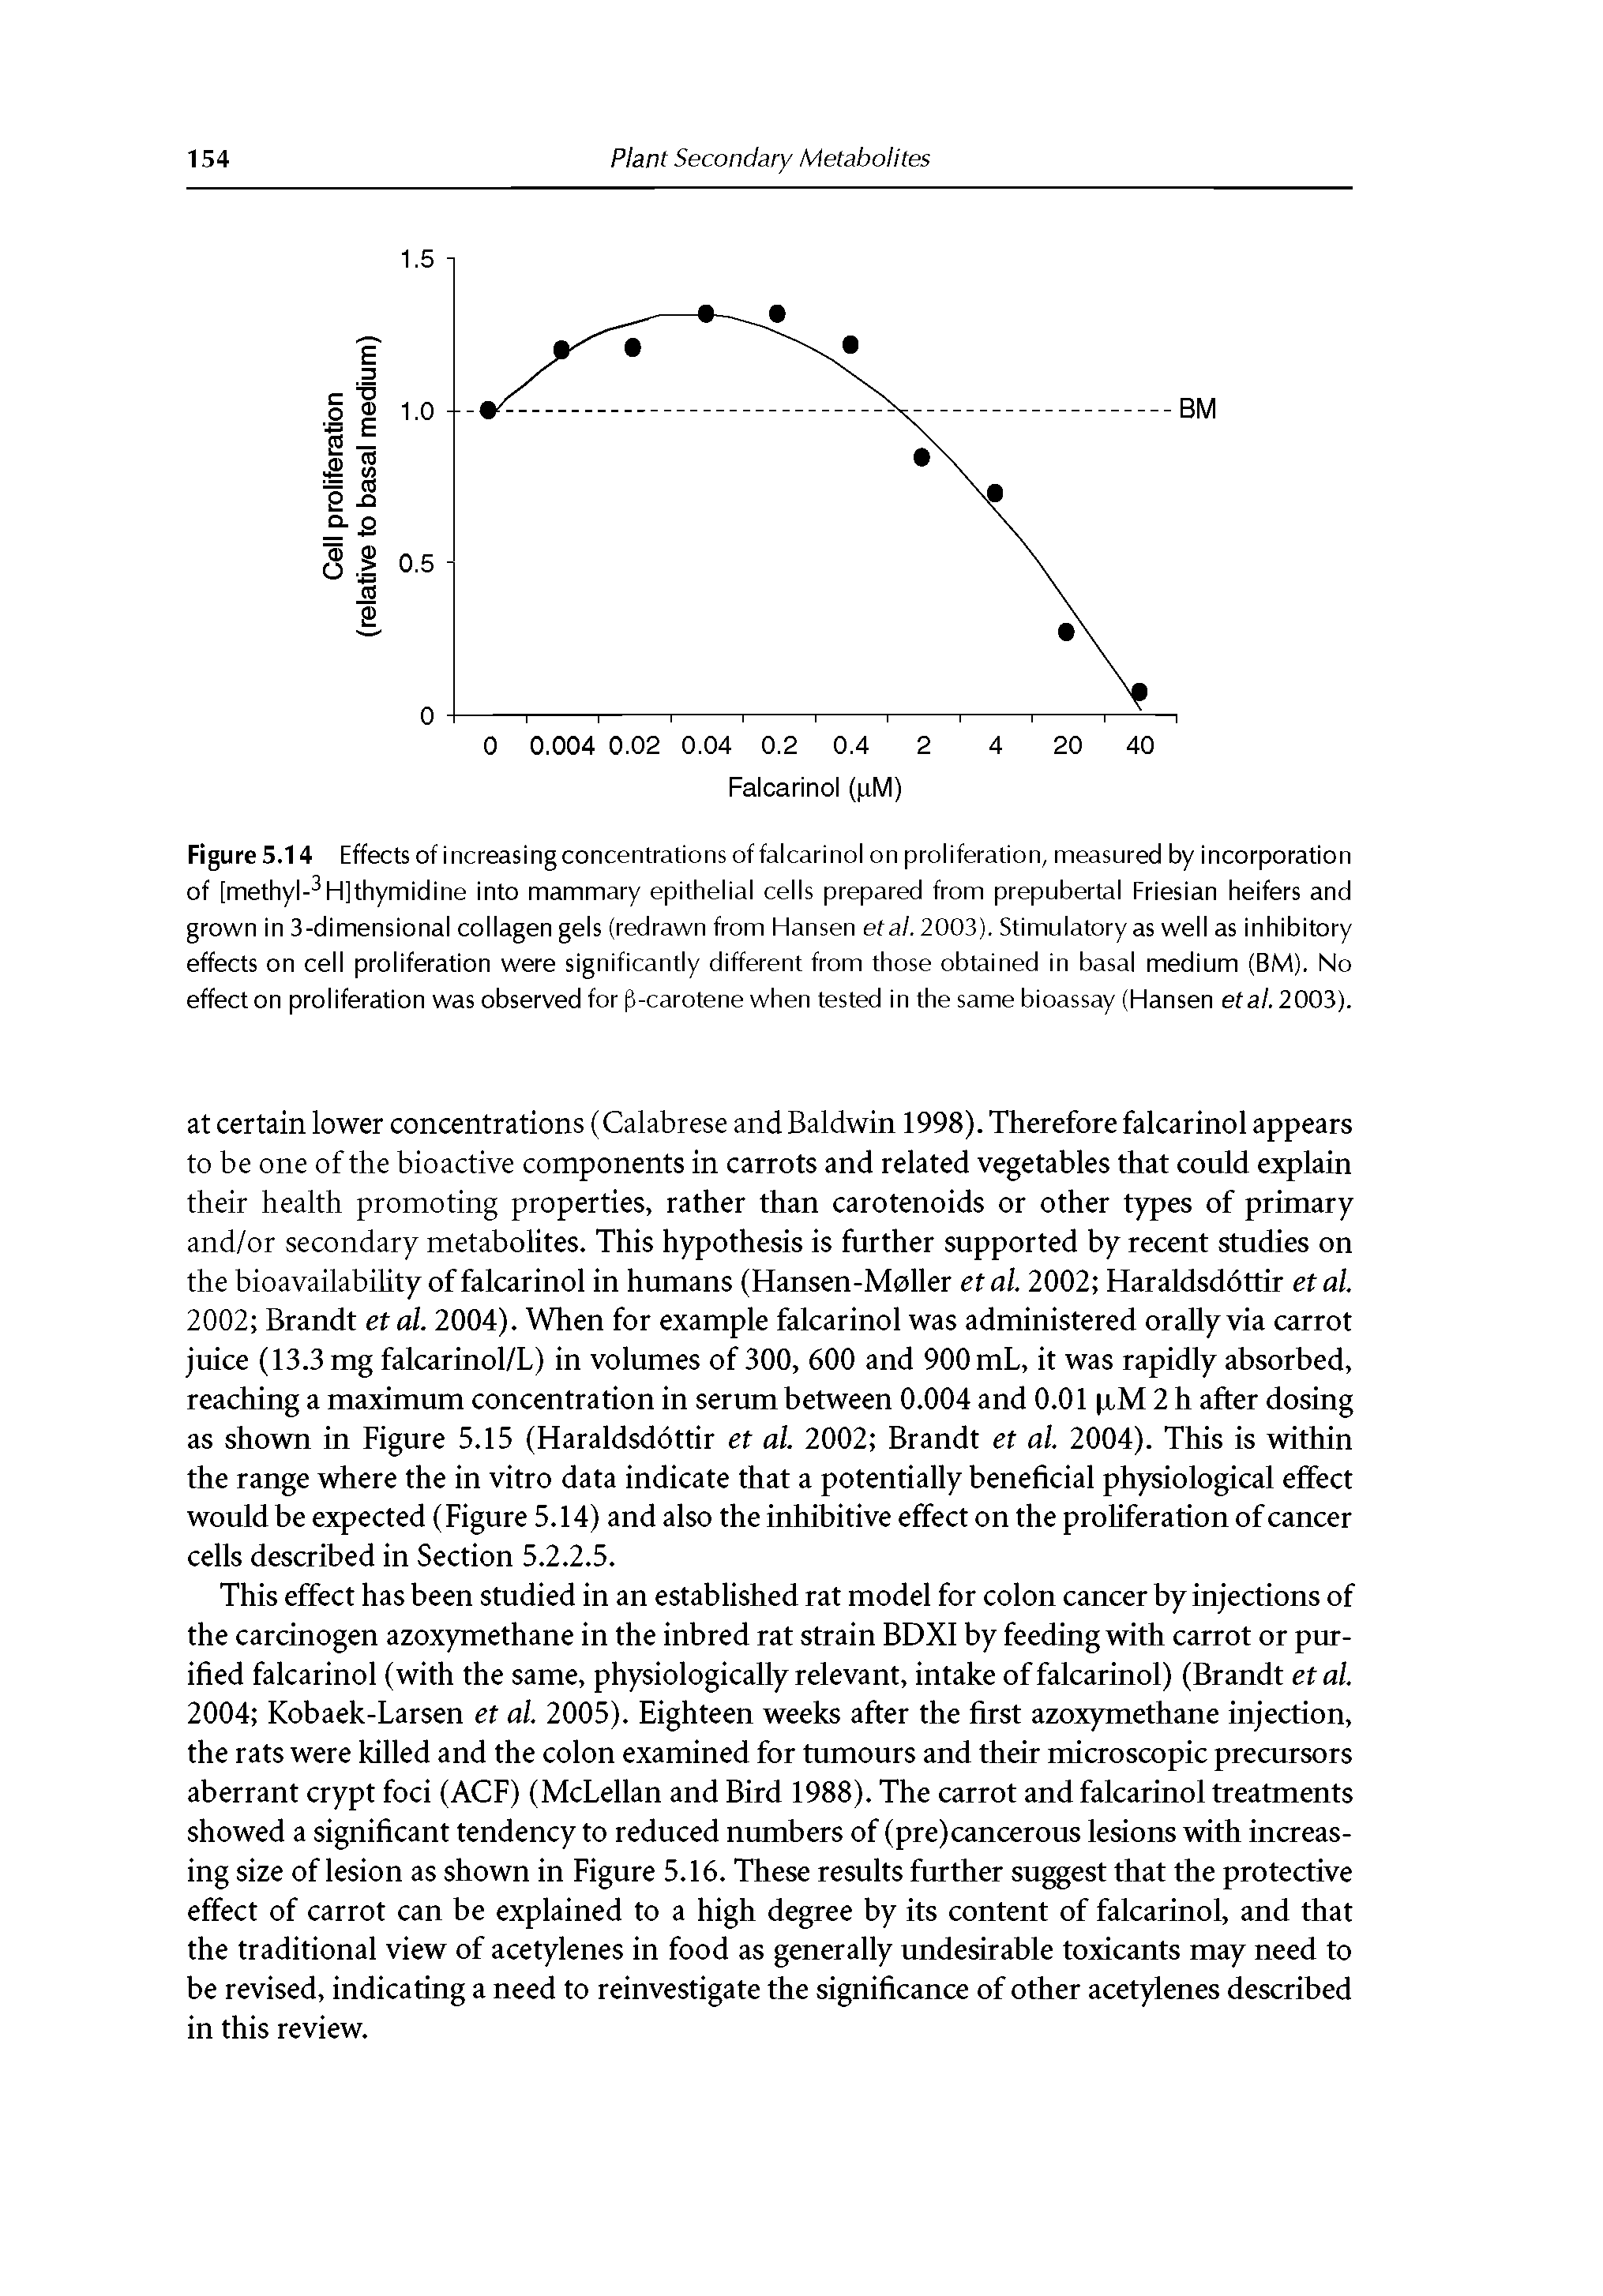 Figure 5.14 Effects of increasing concentrations of falcarinol on proliferation, measured by incorporation of [methyl- H]thymidine into mammary epithelial cells prepared from prepubertal Friesian heifers and grown in 3-dimensional collagen gels (redrawn from Hansen efa/.2003). Stimulatory as well as inhibitory effects on cell proliferation were significantly different from those obtained in basal medium (BM). No effect on proliferation was observed for p-carotene when tested in the same bioassay (Hansen etal. 2003).